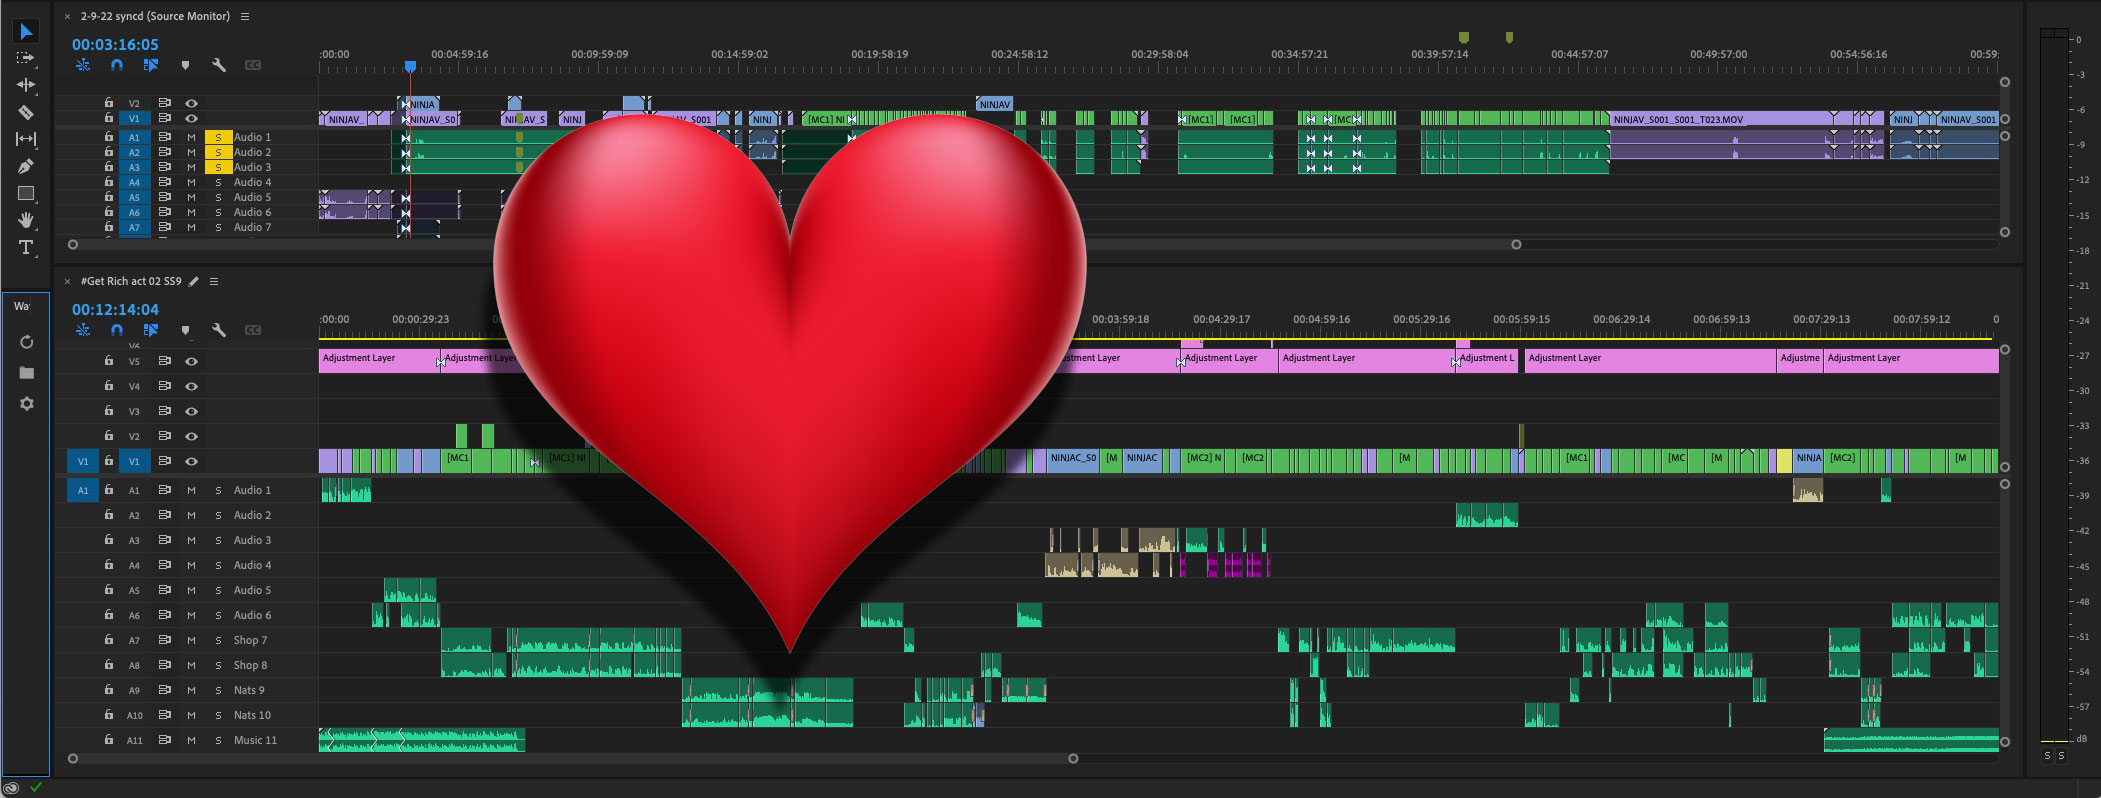 My single most loved feature in Adobe Premiere Pro 17